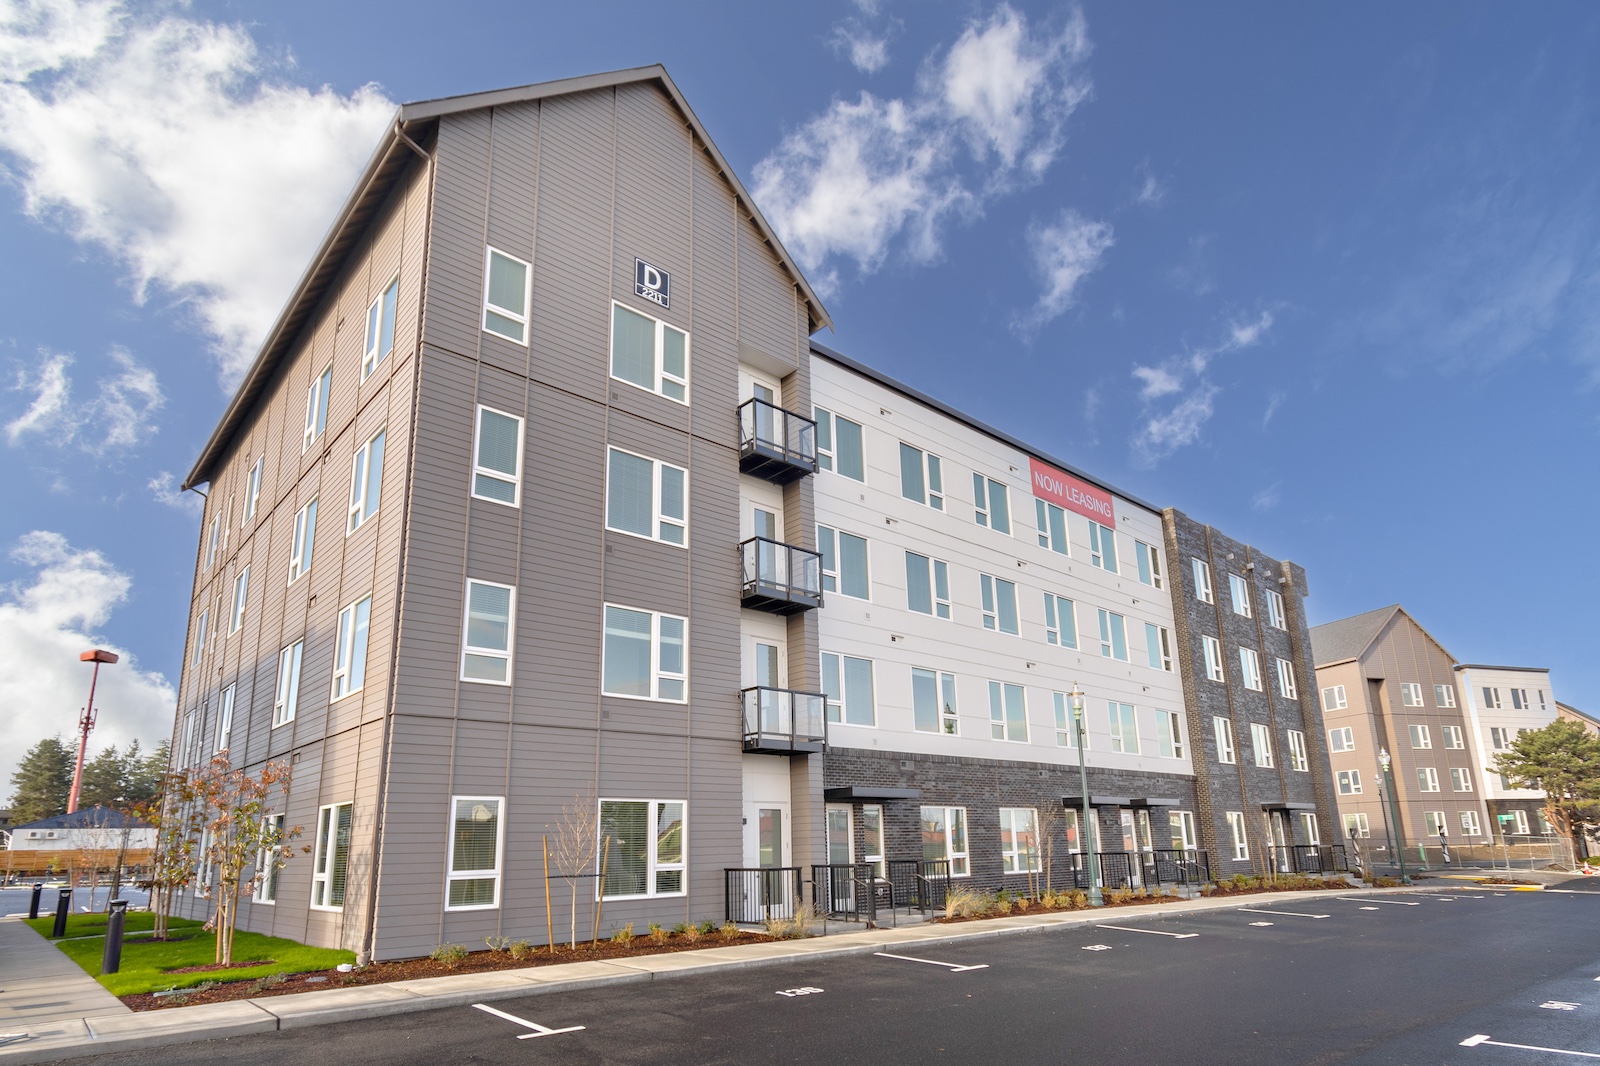 Wood Partners Unveils Latest Urban Village Apartment Community with Grand Opening of Alta University Place in Seattle-Tacoma Market